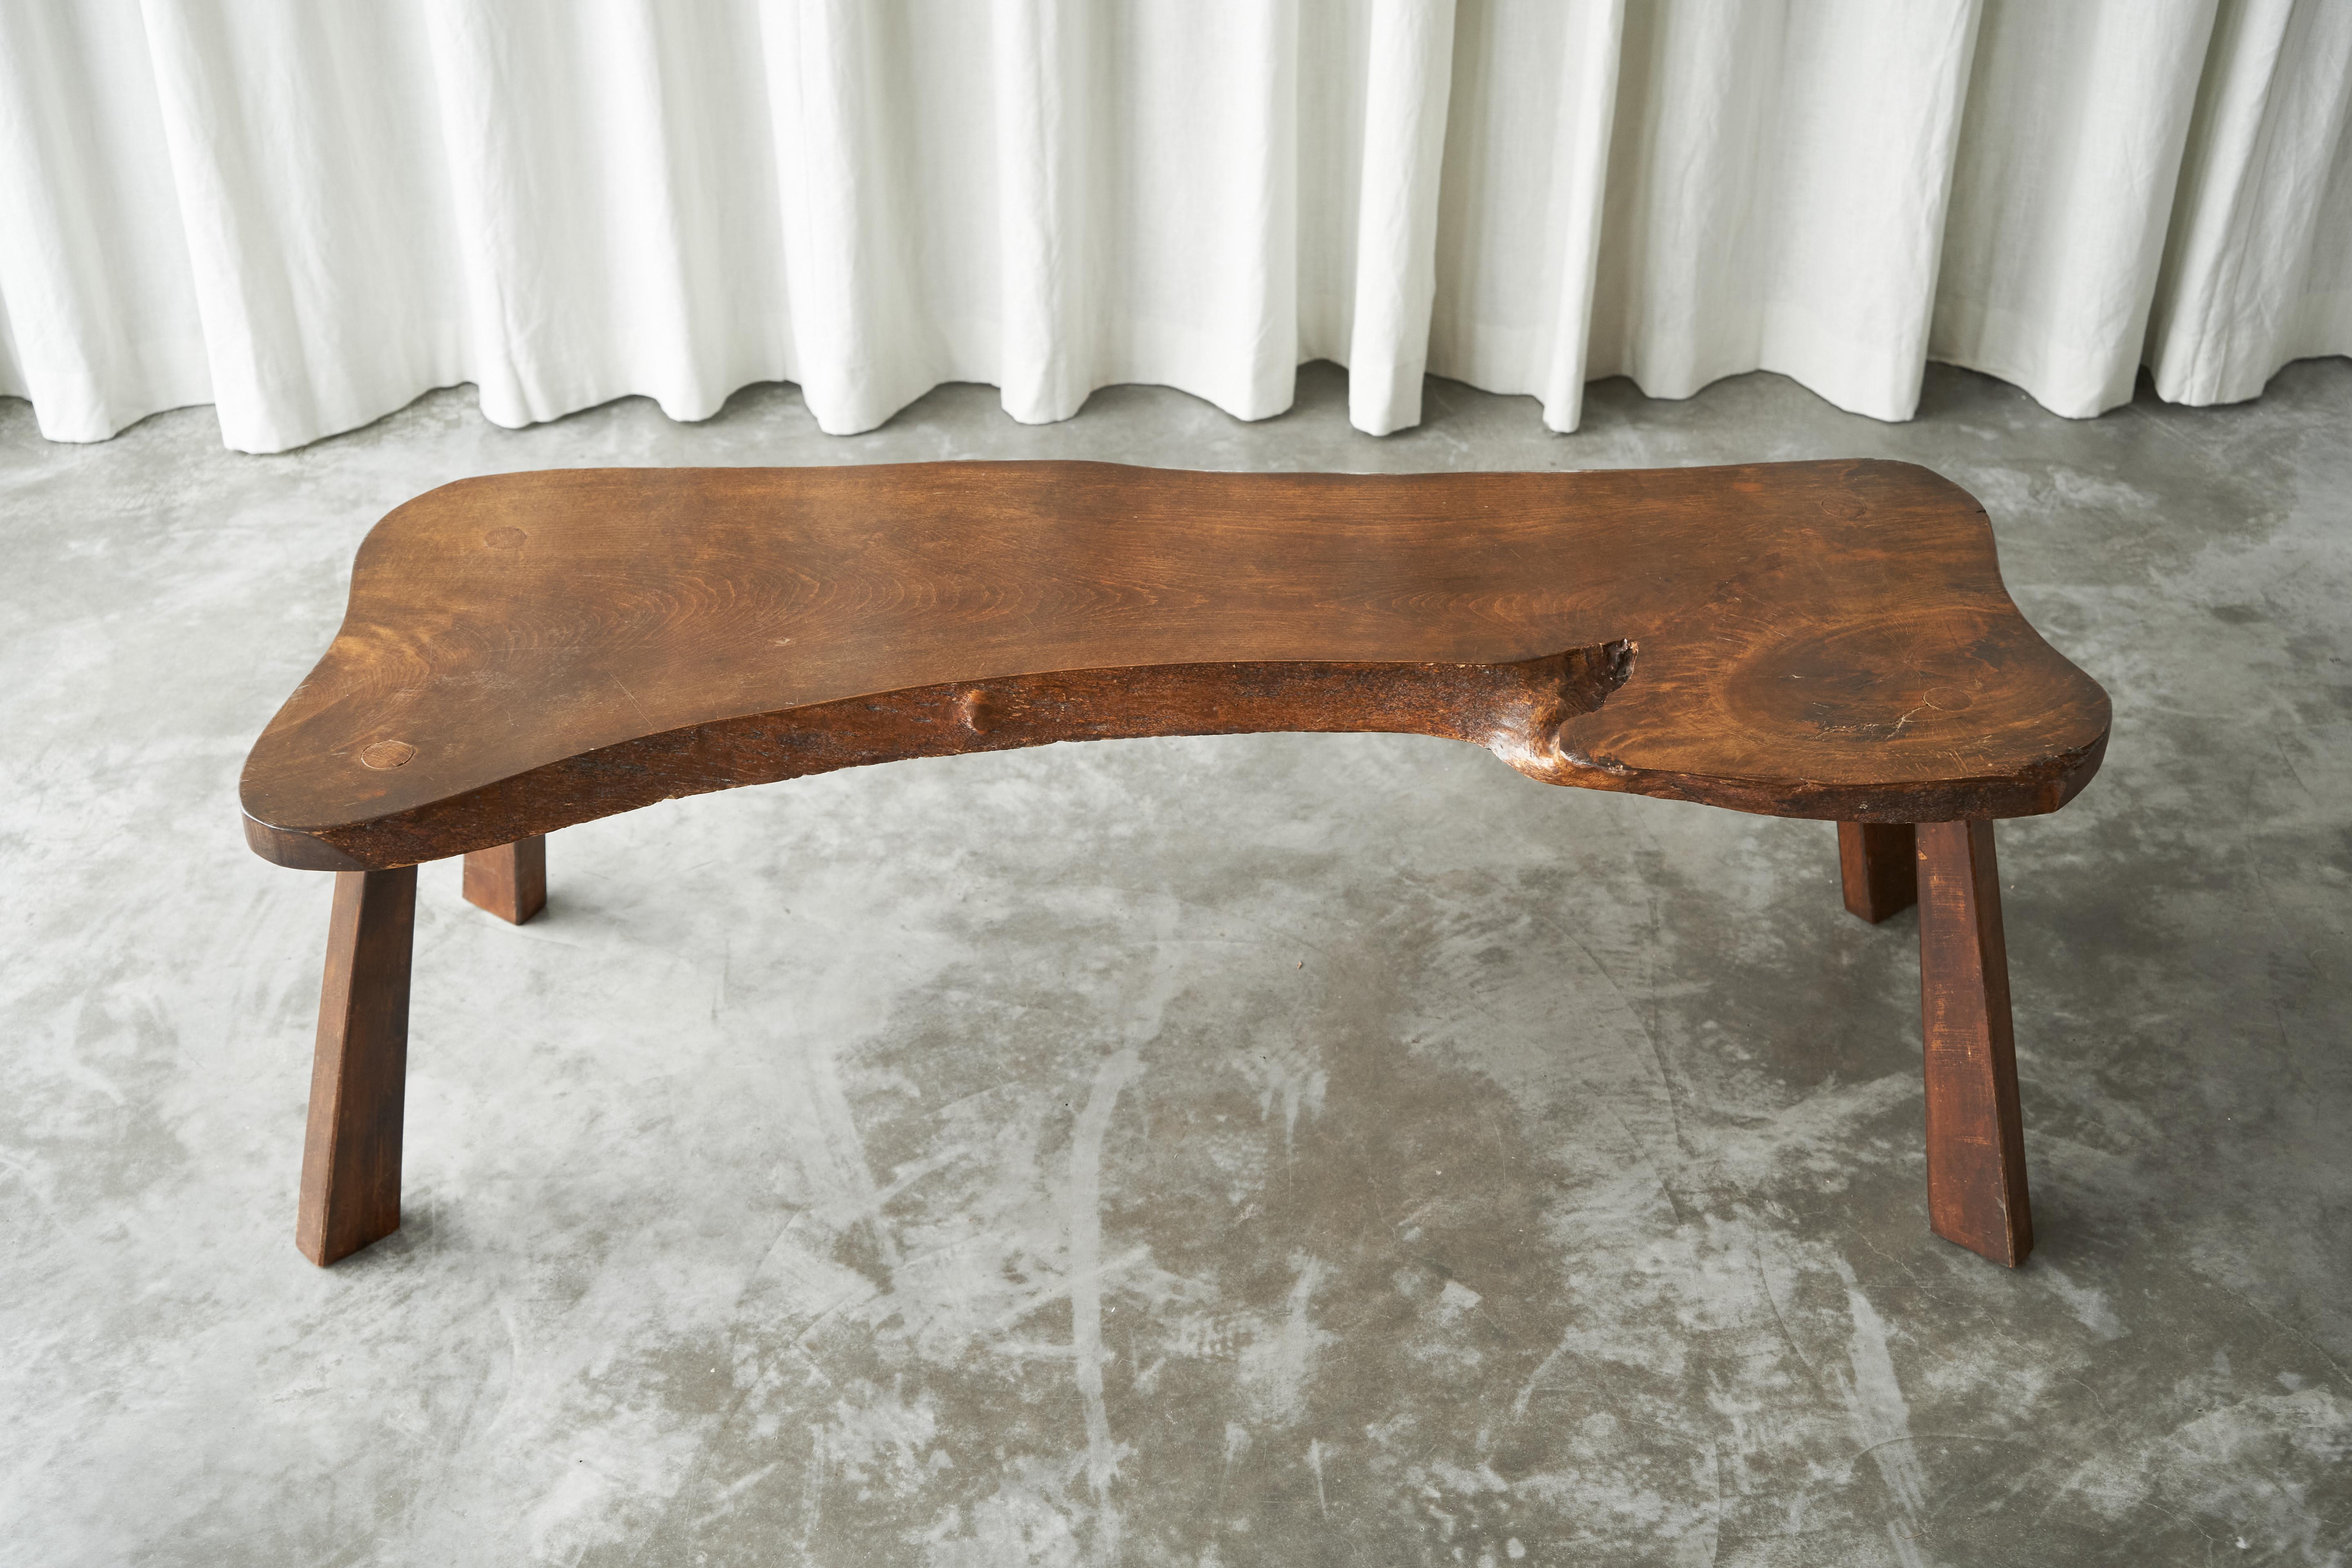 Live Edge Solid Elm Wood Coffee Table 1950s

A true gem this is, this live edge coffee table. Made by an unknown woodworker in the 1950s, in beautiful solid Elm wood. Its appearance shows similarity to the work of George Nakashima, one of the